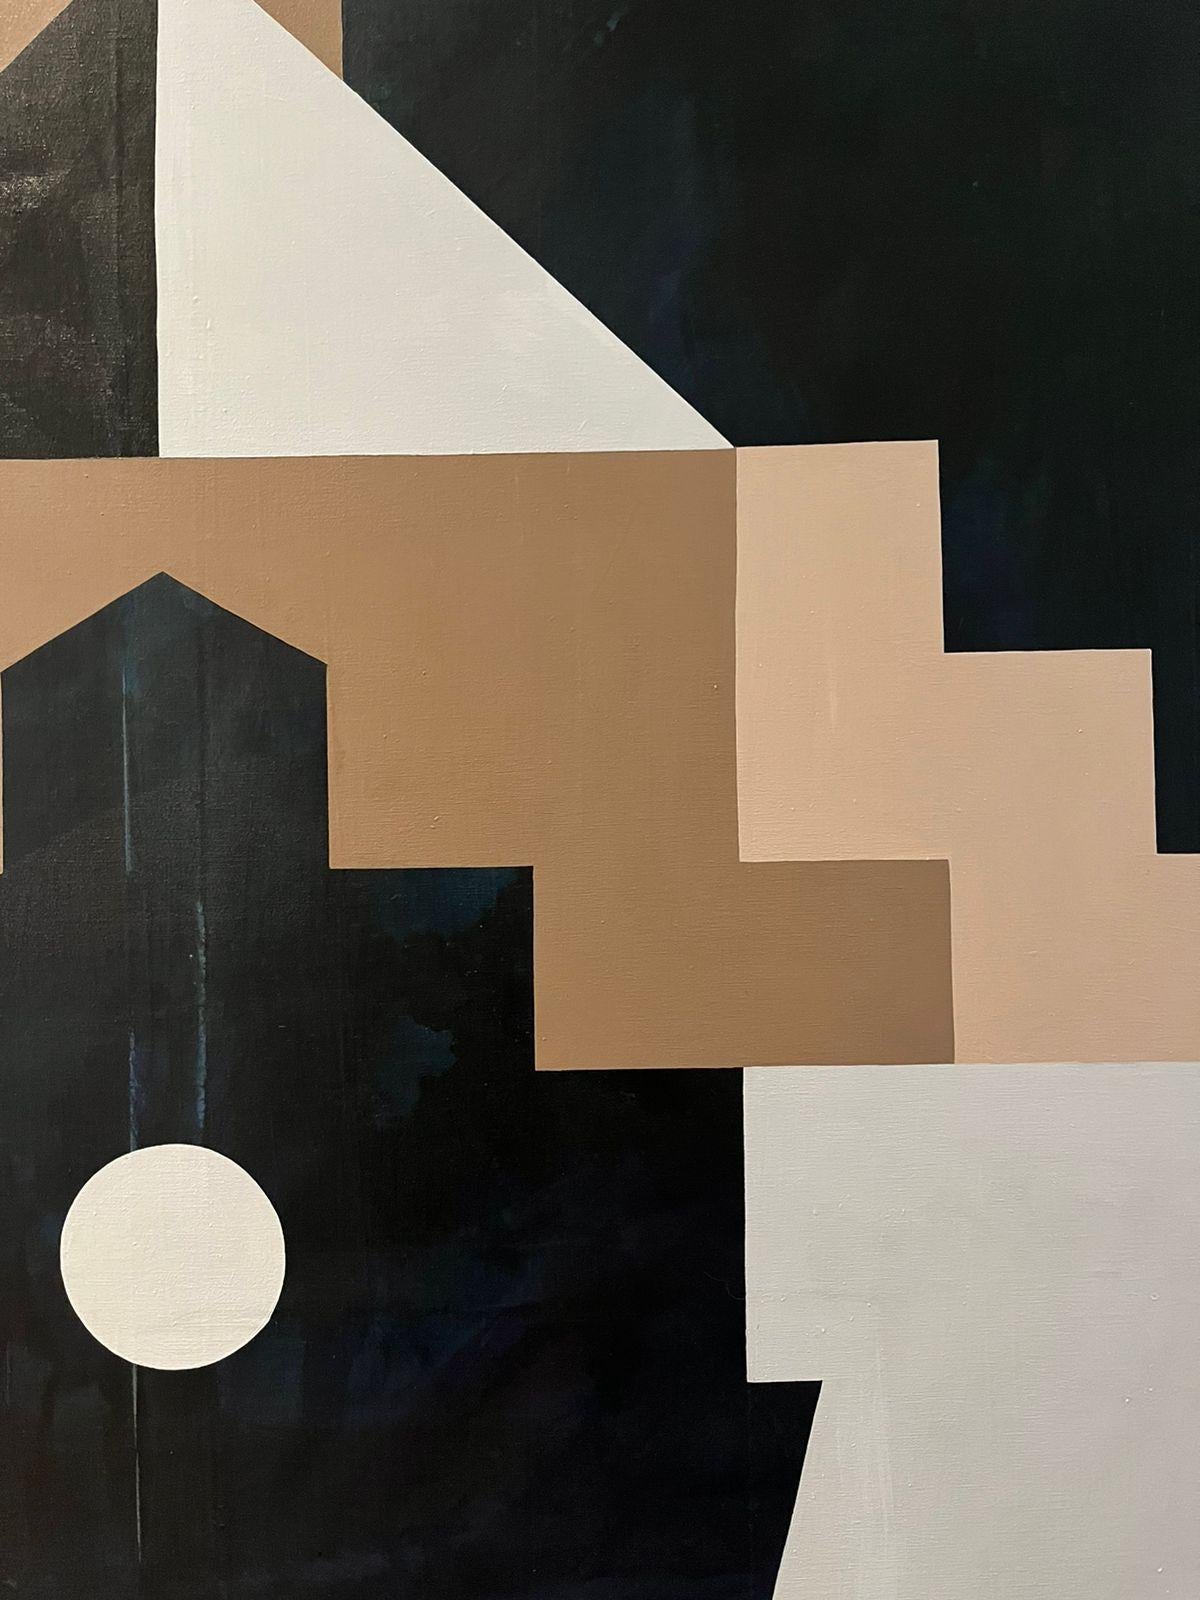 Contemporary Art, Abstract Painting
Copper paint and Acrylic on canvas
150x100cm
Signed and dated on the back 

About the artist

Alejandro Legorreta (Mexico, 1987)

I studied Hispanic Literature at Universidad Nacional Autonoma de Mexico (UNAM). My